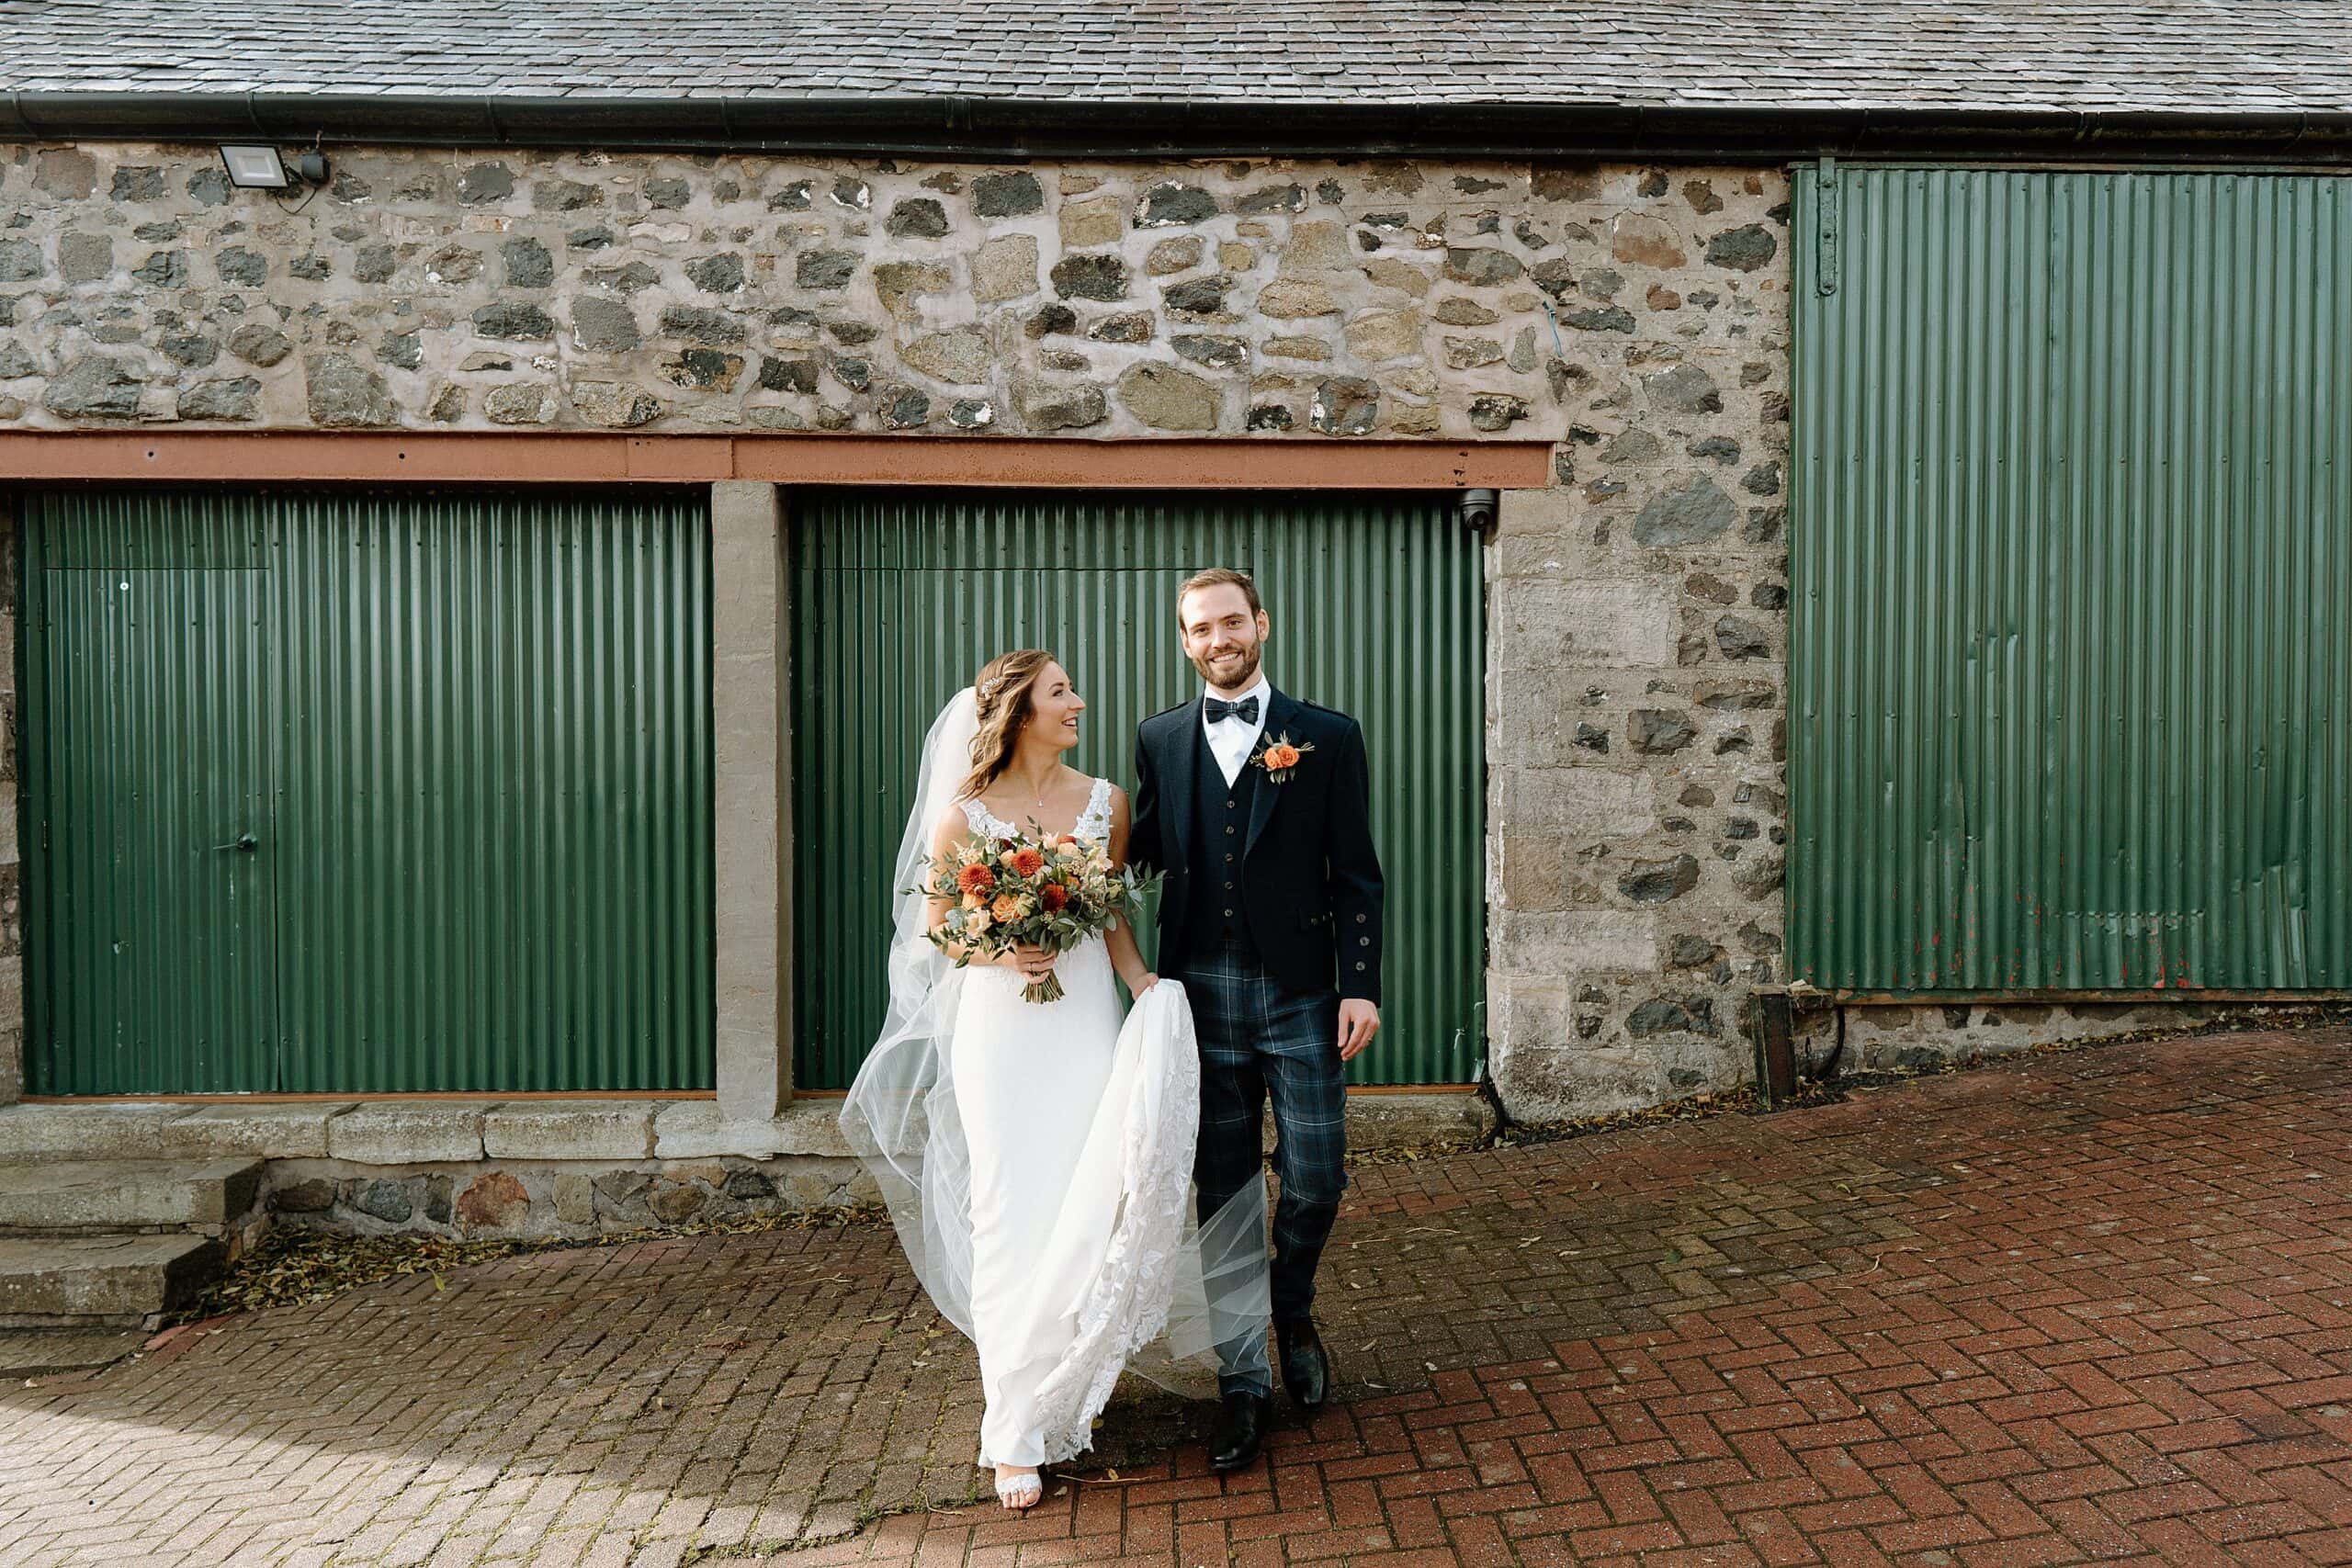 outside exterior view of harelaw farm wedding barn venue fenwick scotland showing bride and groom smiling in front of green barn doors